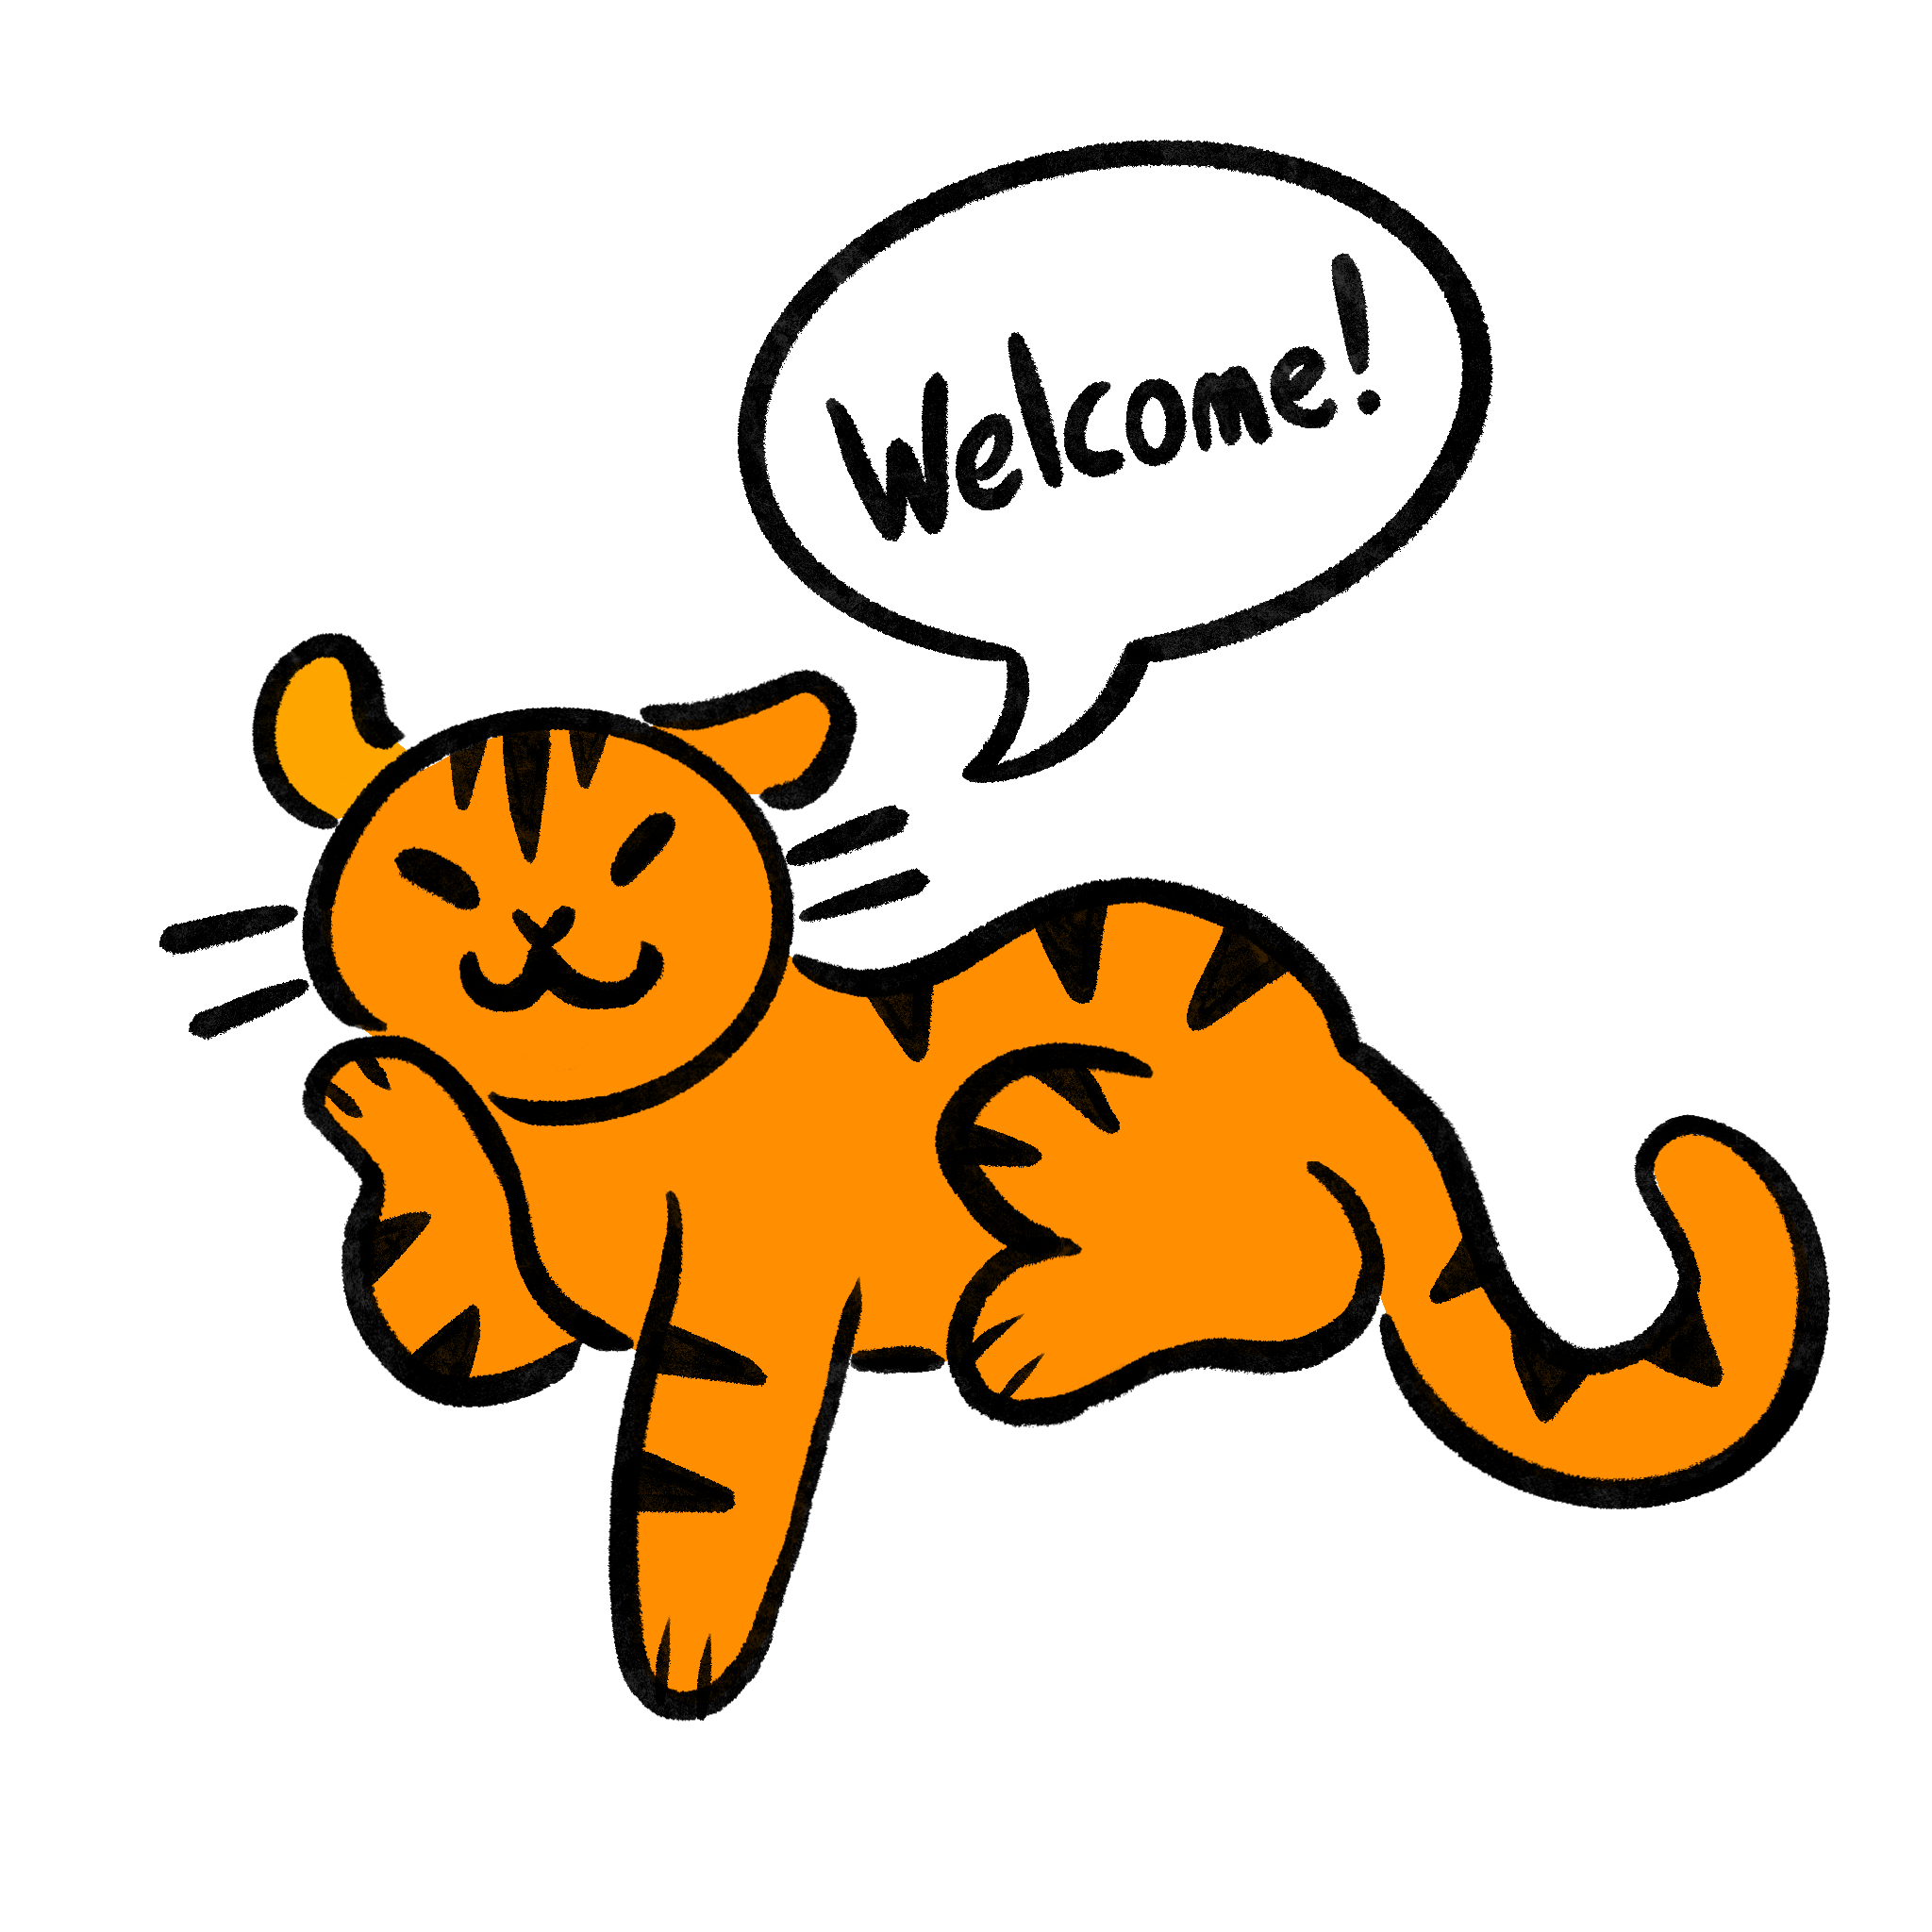 Tiger saying welcome!